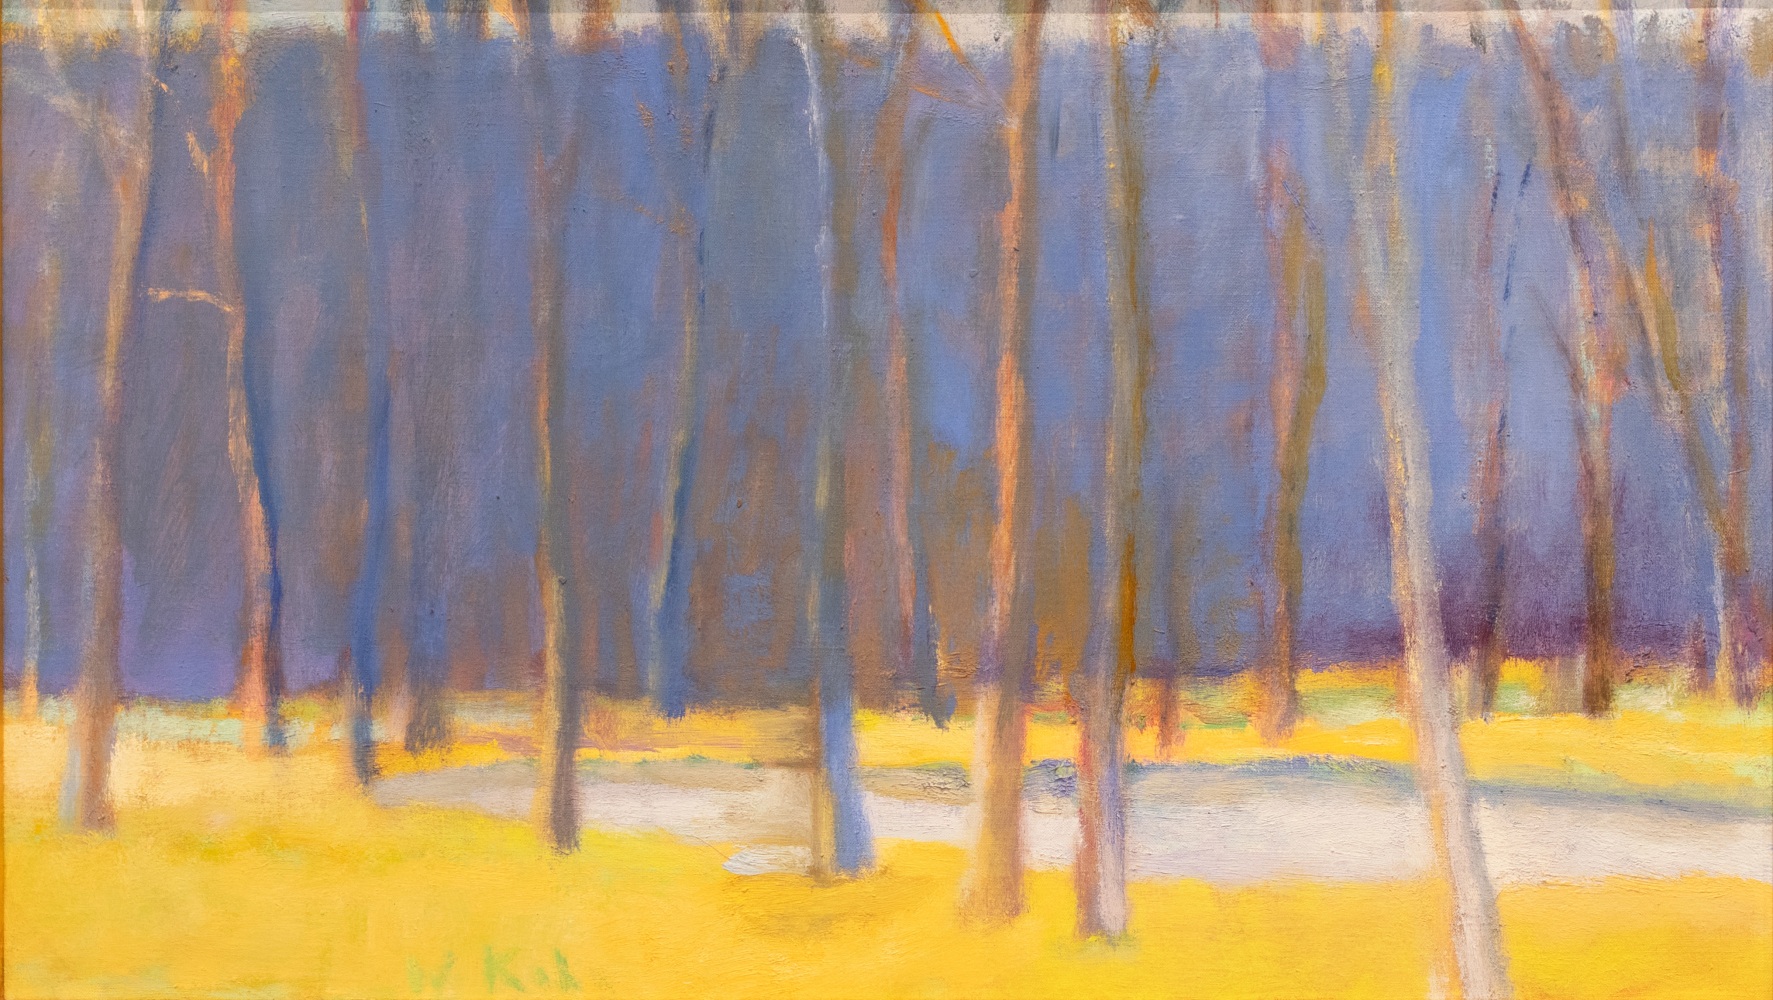 Wolf Kahn, A Study of Yellow and Purple, 1995, oil on linen, 16 x 28 inches, Wolf Kahn art for sale, Wolf Kahn Trees